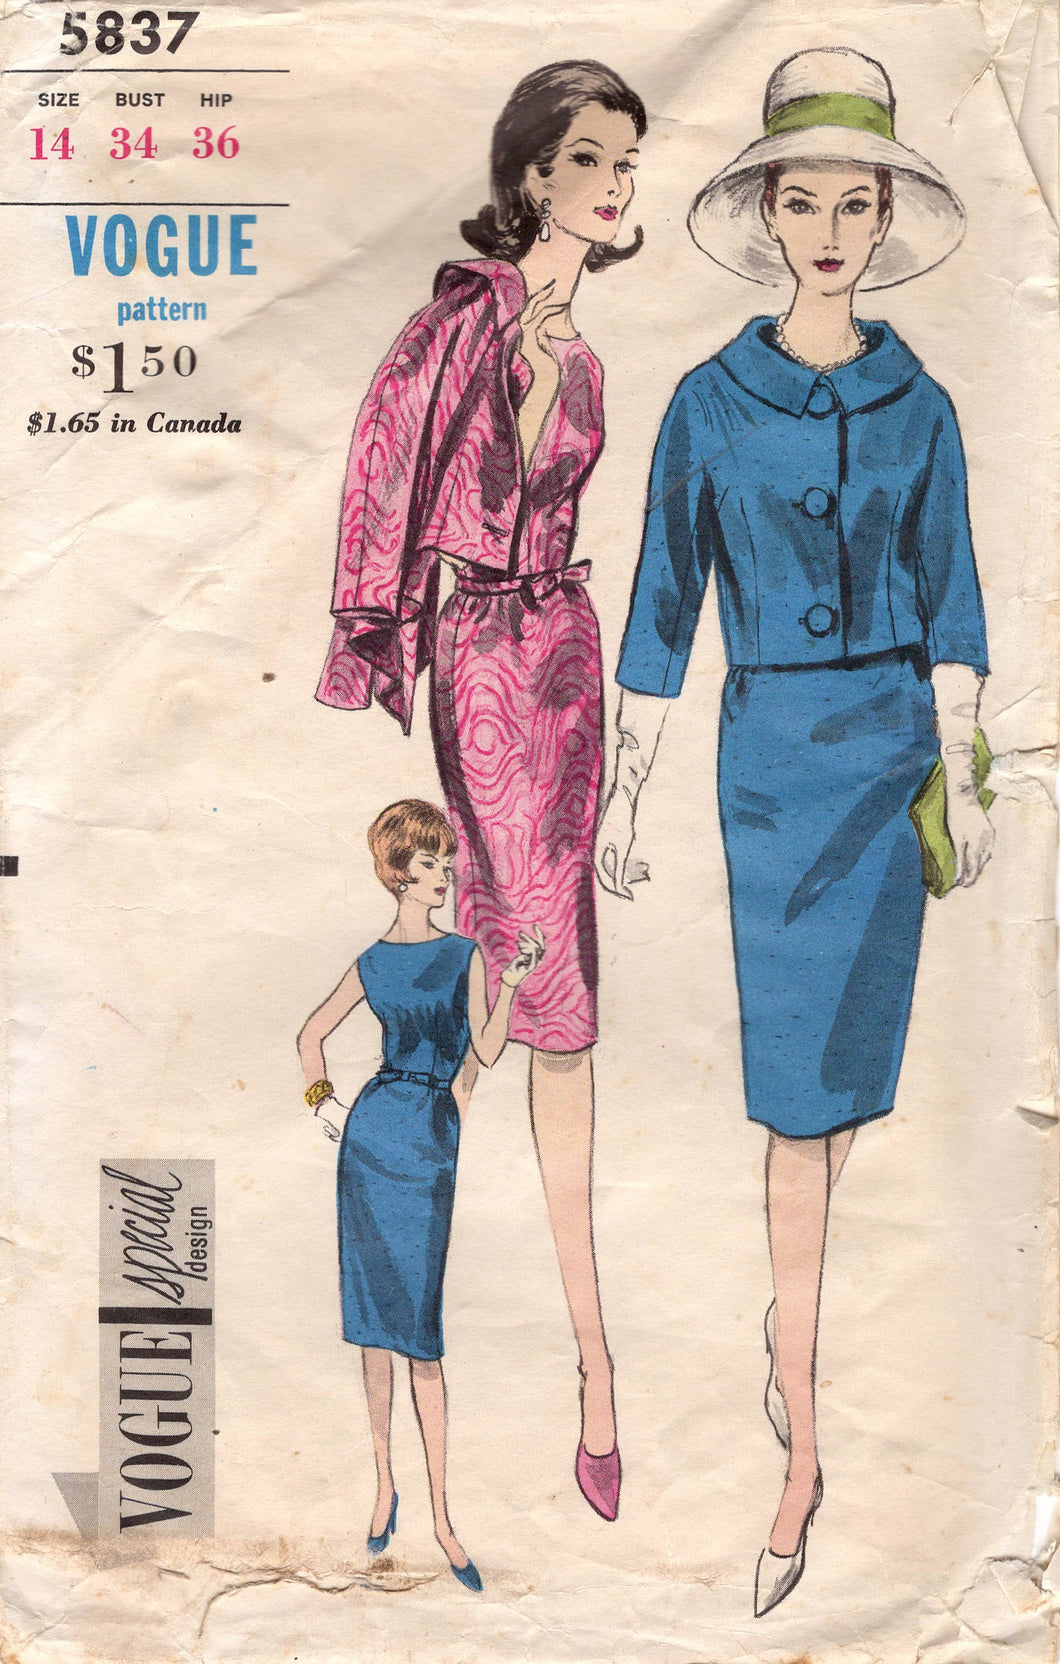 1960's Vogue One Piece Sheath Dress with Jacket Pattern - Bust 34